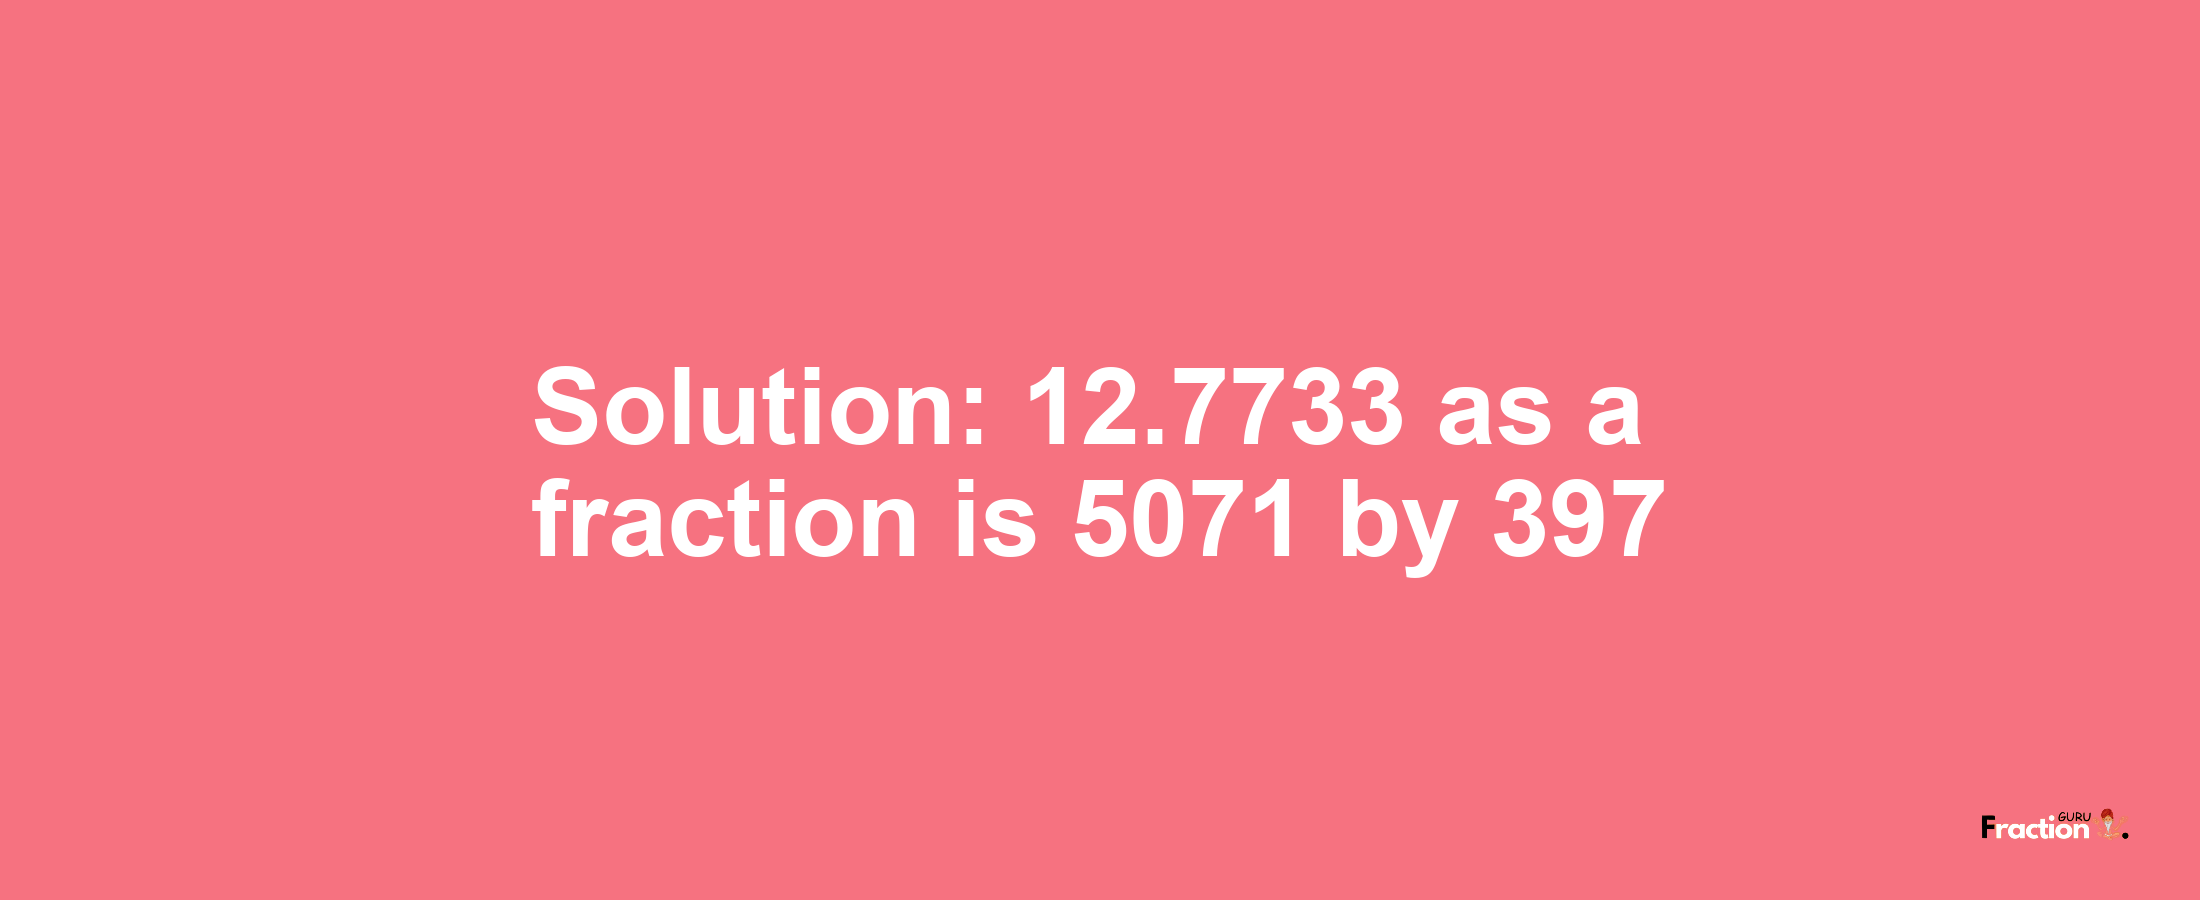 Solution:12.7733 as a fraction is 5071/397